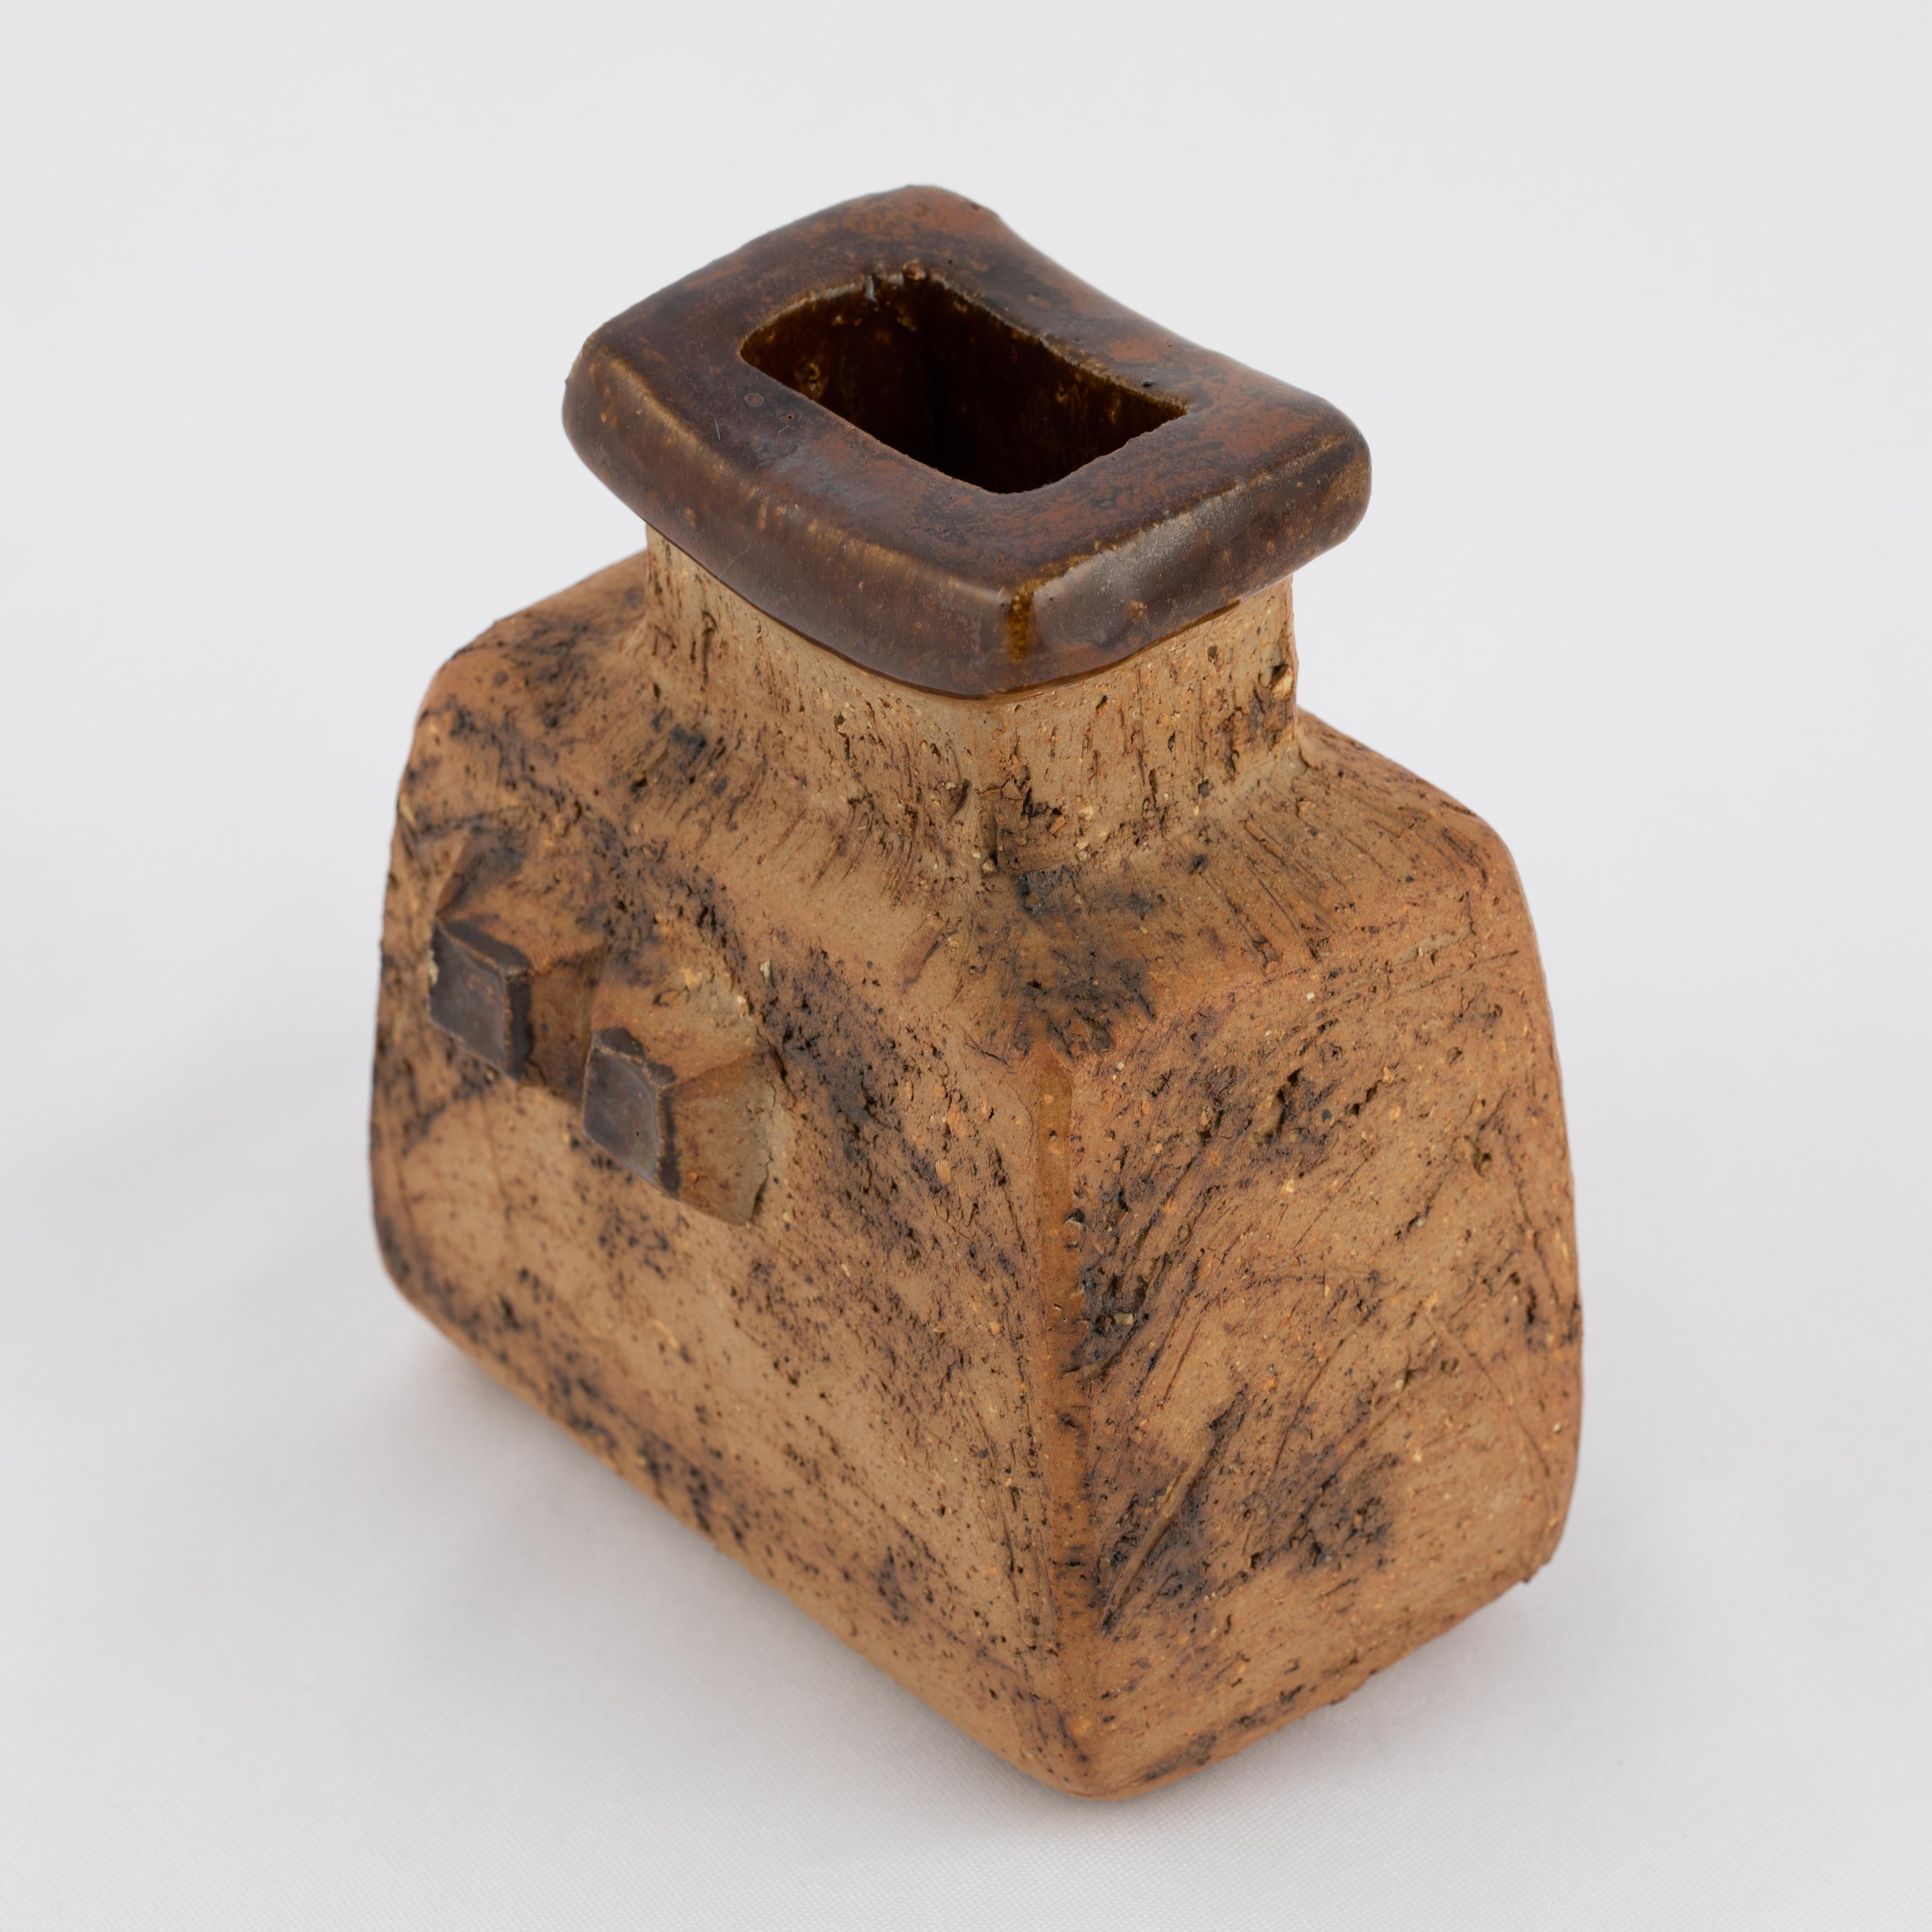 Stoneware vase with brown-glaze accents by Swedish artist Curt Magnus Addin (1931-2007). The rectilinear Brutalist form features a rough stoneware surface and a raised pattern of two glazed squares on front and back. The opening is highlighted with